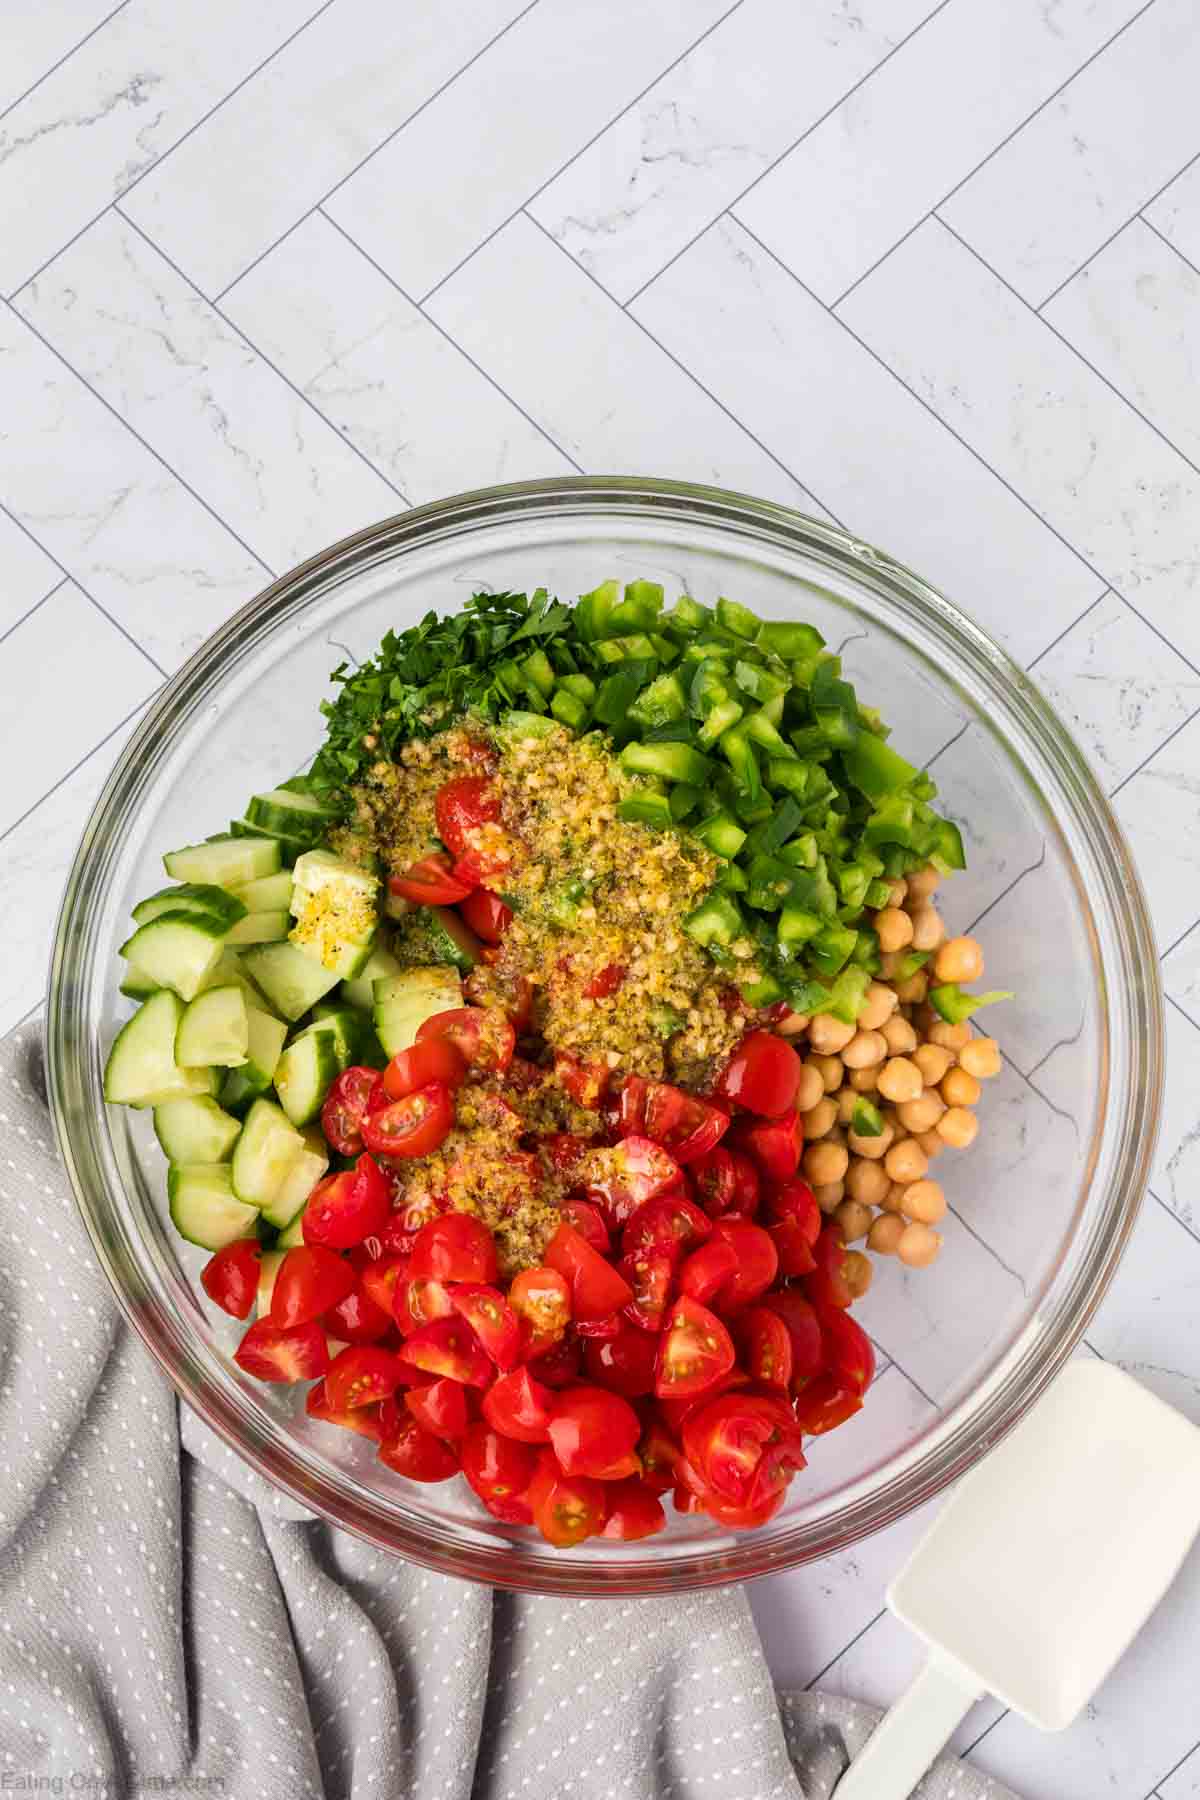 Chopped cherry tomatoes, diced cucumbers, bell peppers, parsley, chickpea topped with dressing in a bowl